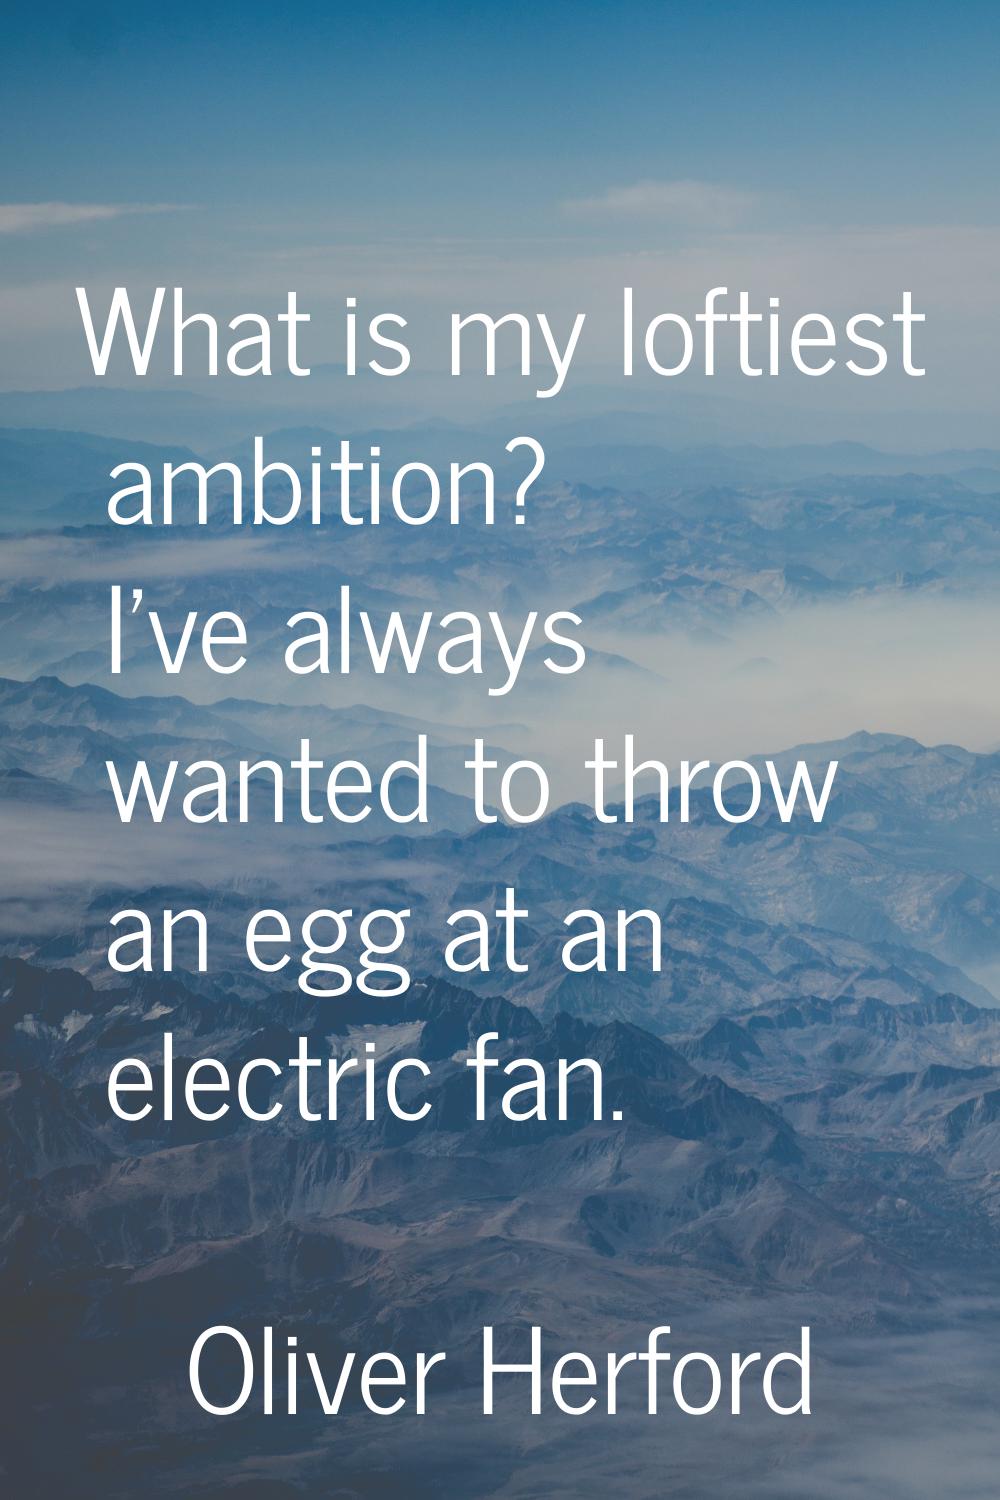 What is my loftiest ambition? I've always wanted to throw an egg at an electric fan.